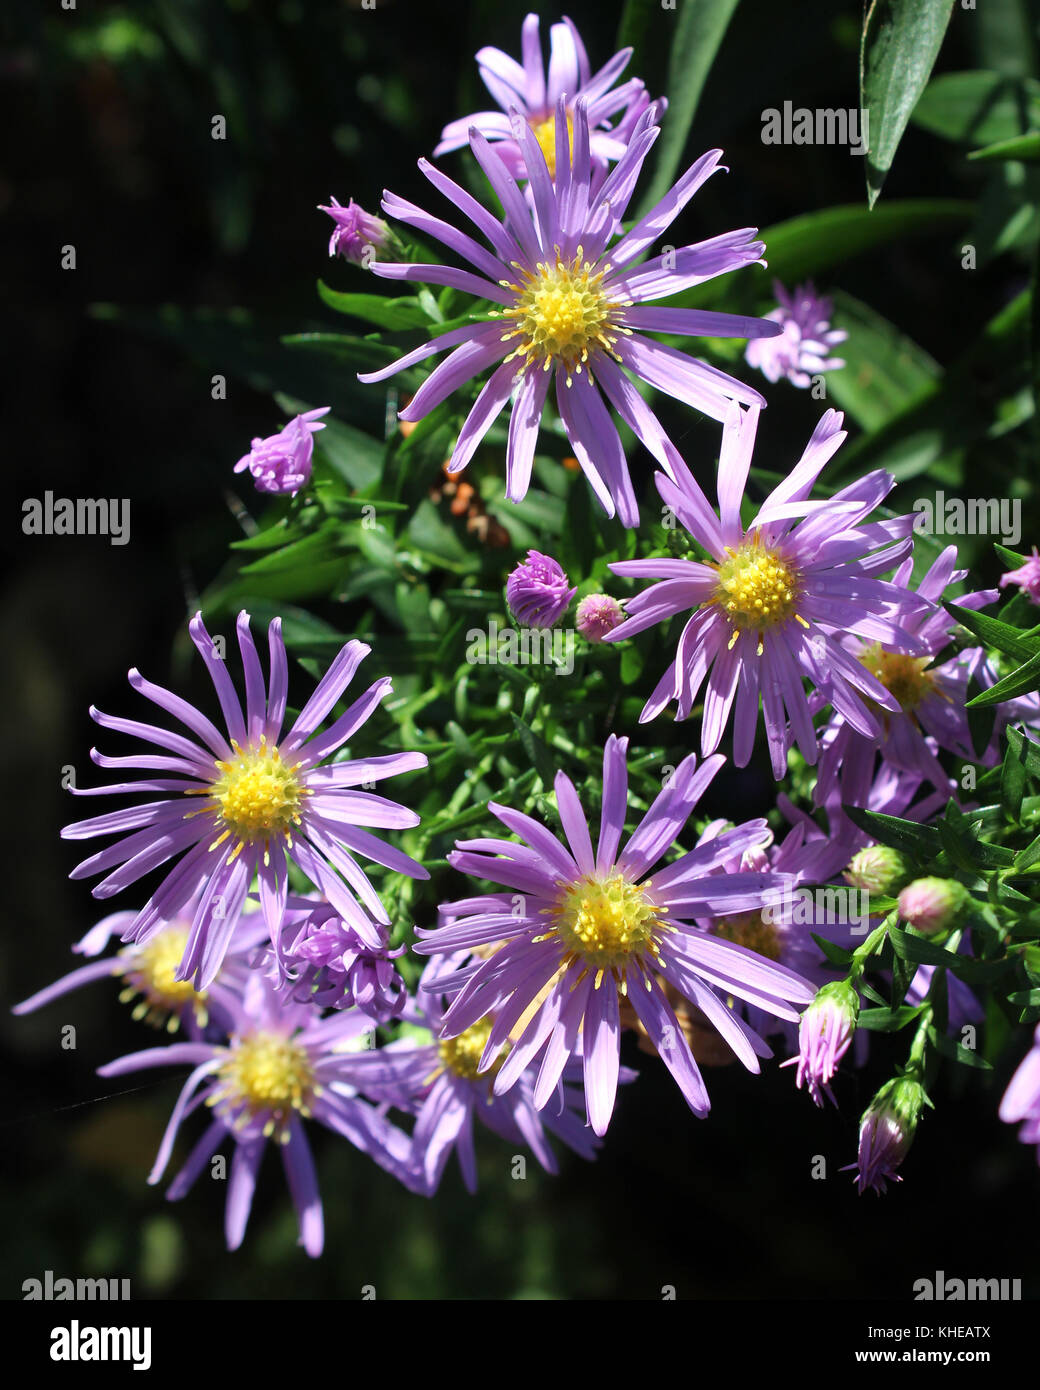 The lovely purple flowers of Symphyotrichum novi belgii, also known as the New York Aster or Michaelmas Daisy. Stock Photo